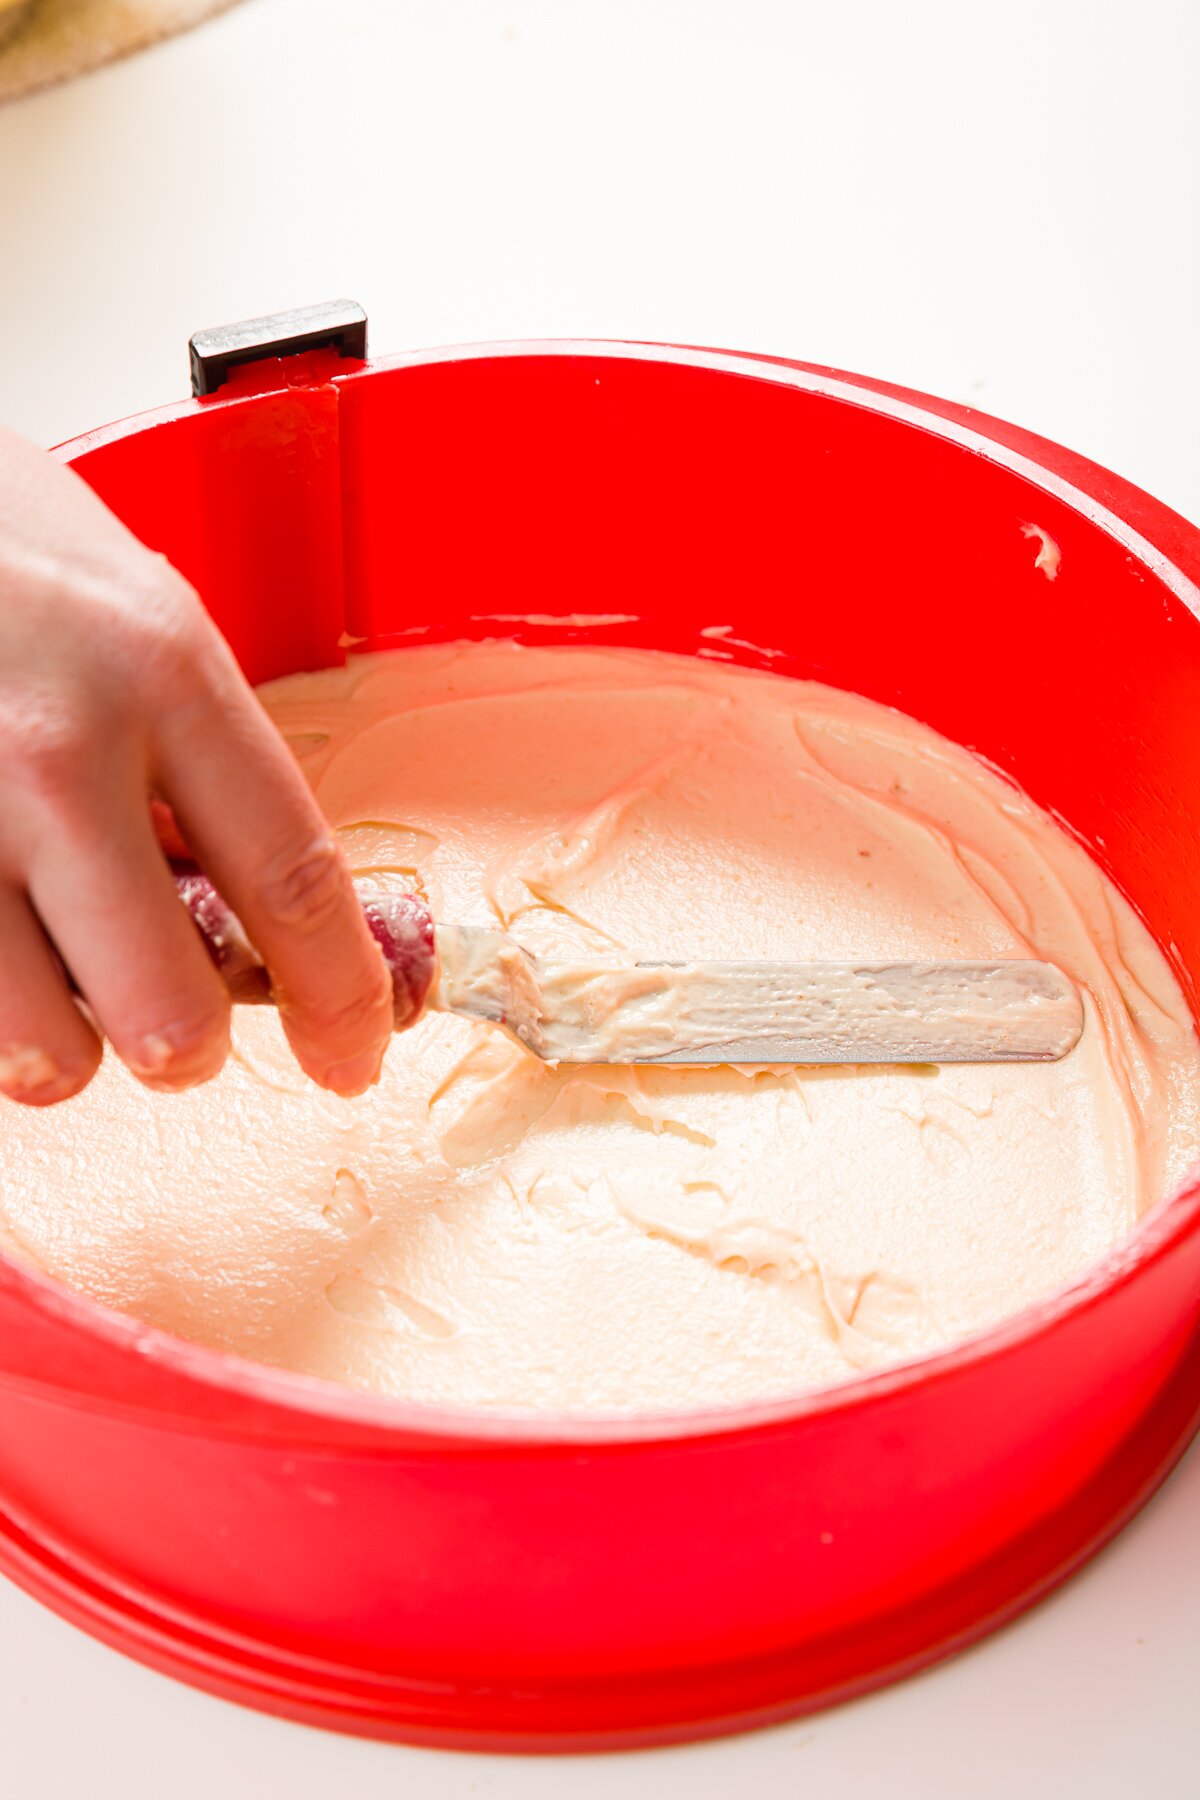 Spreading a thin layer of batter in a red springform pan